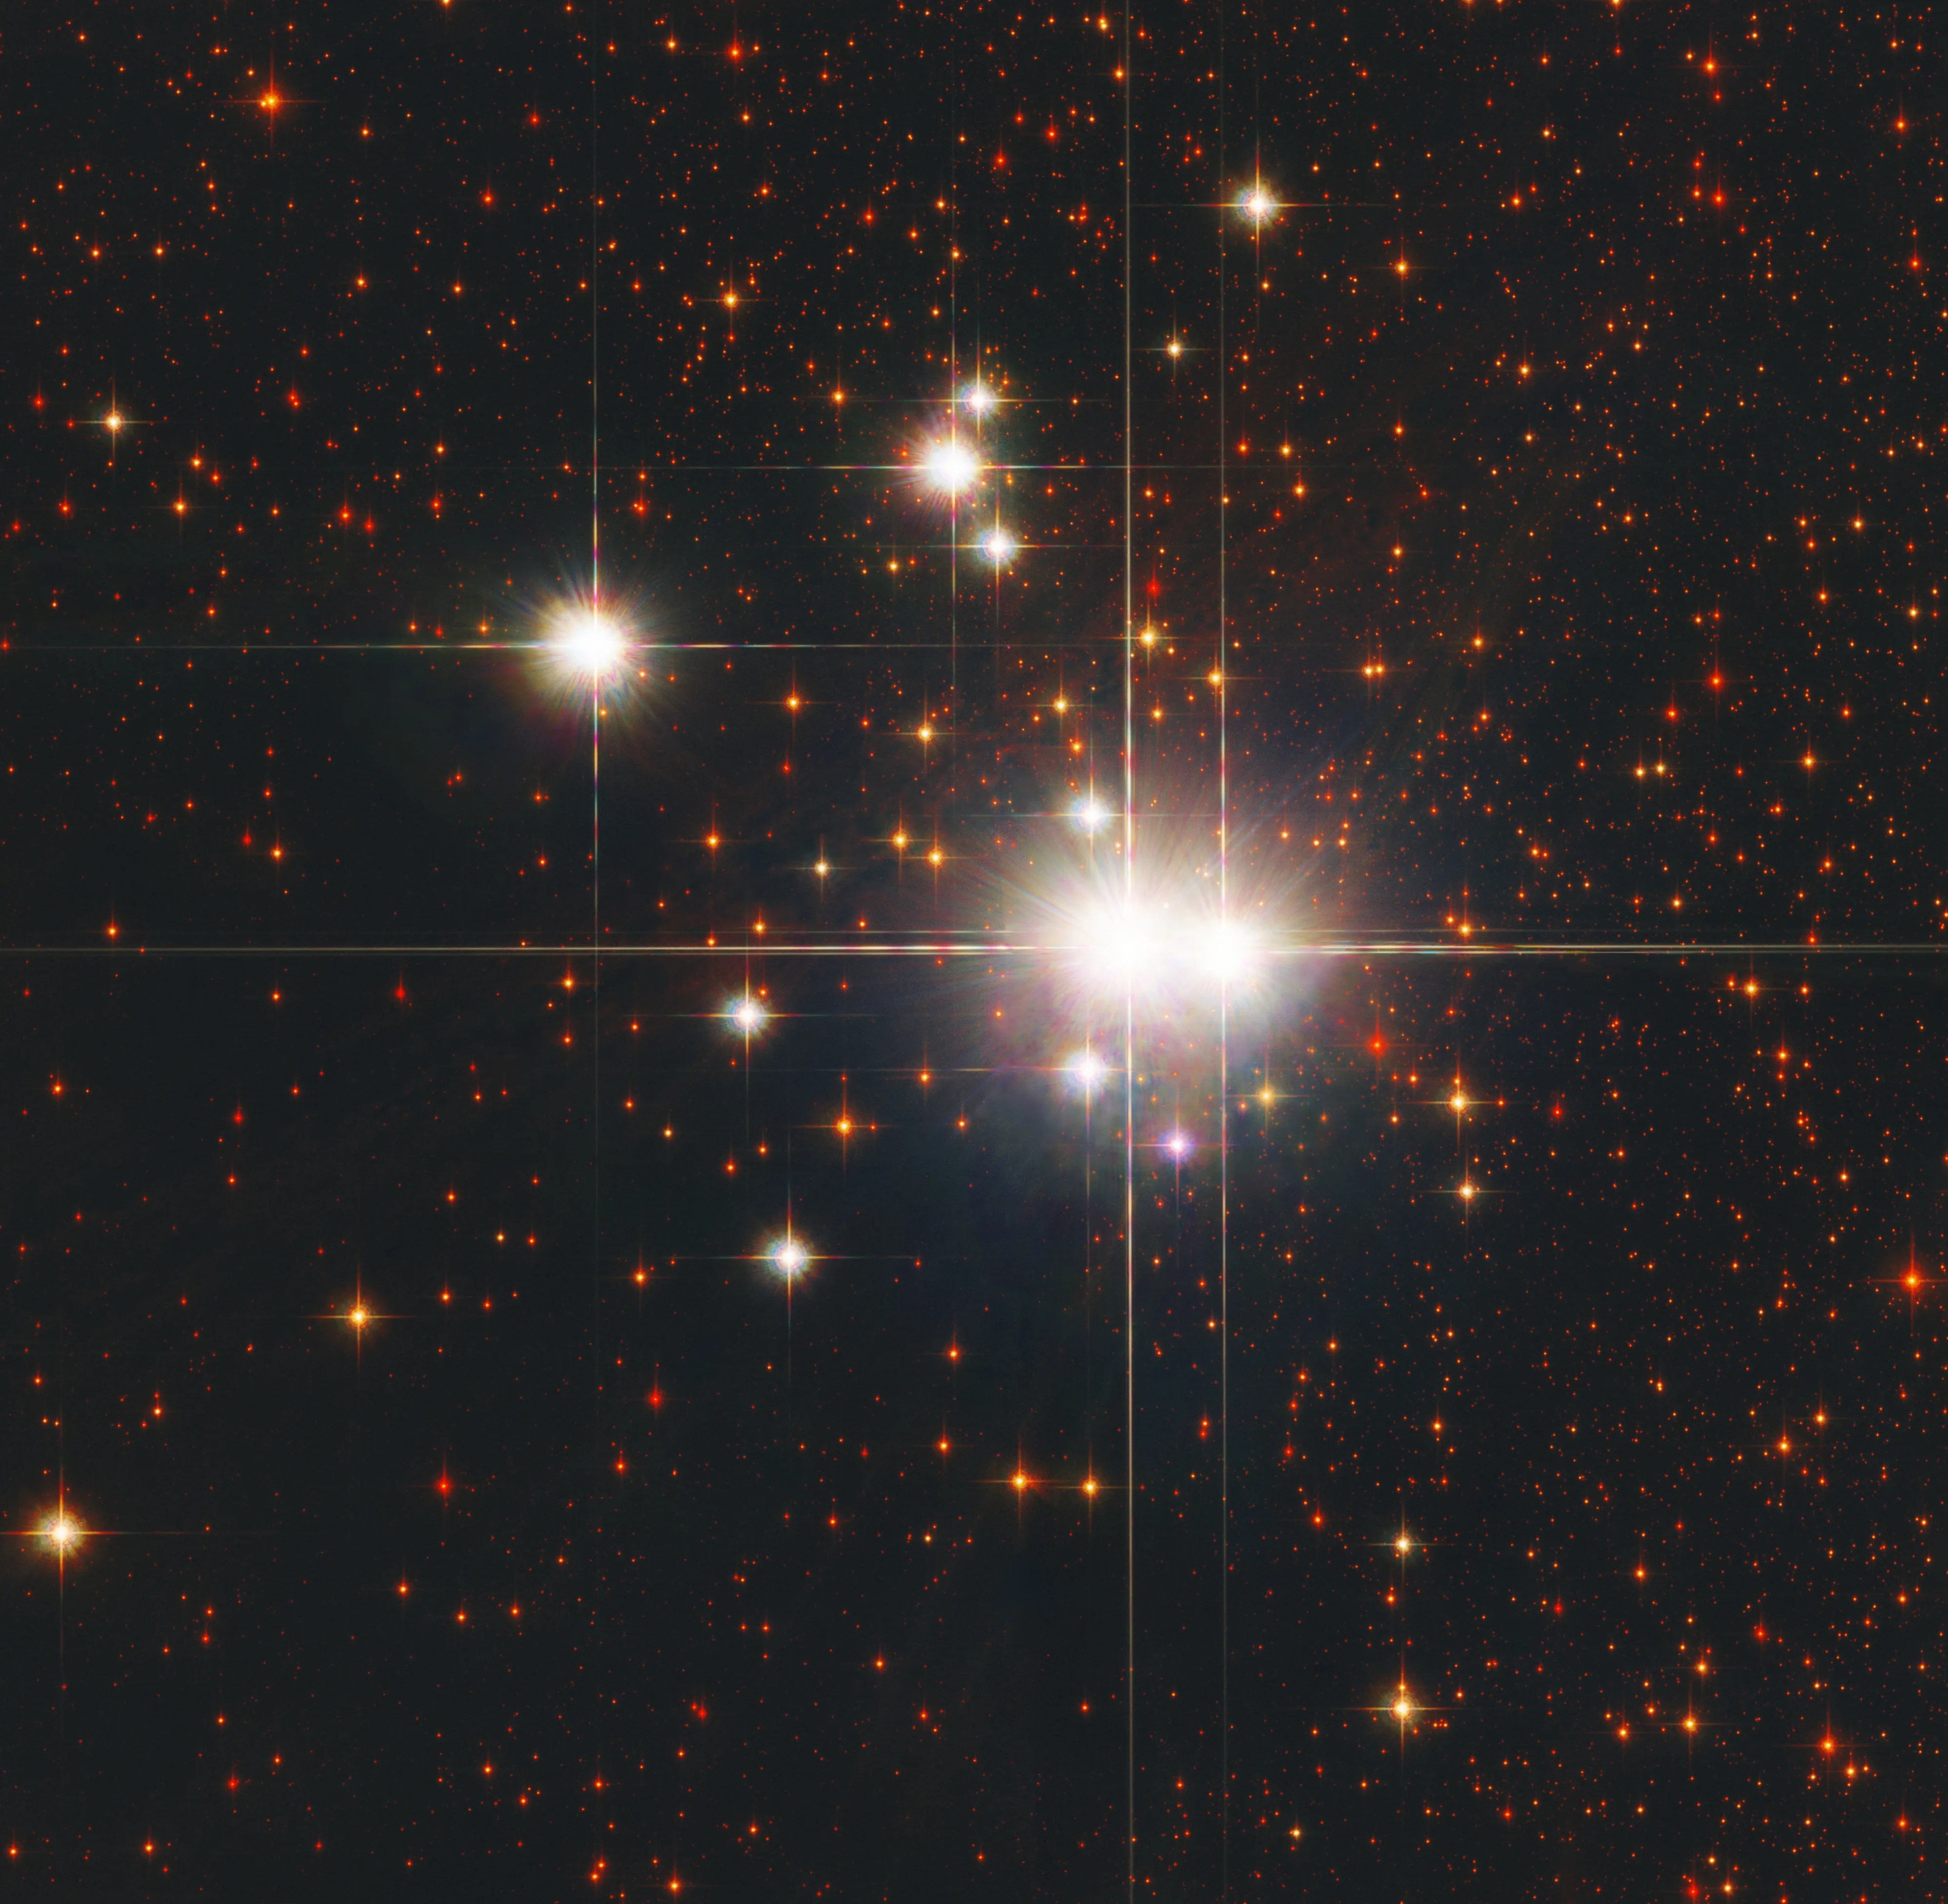 This open star cluster, Caldwell 82 (or NGC 6193), is host to about 30 stars.